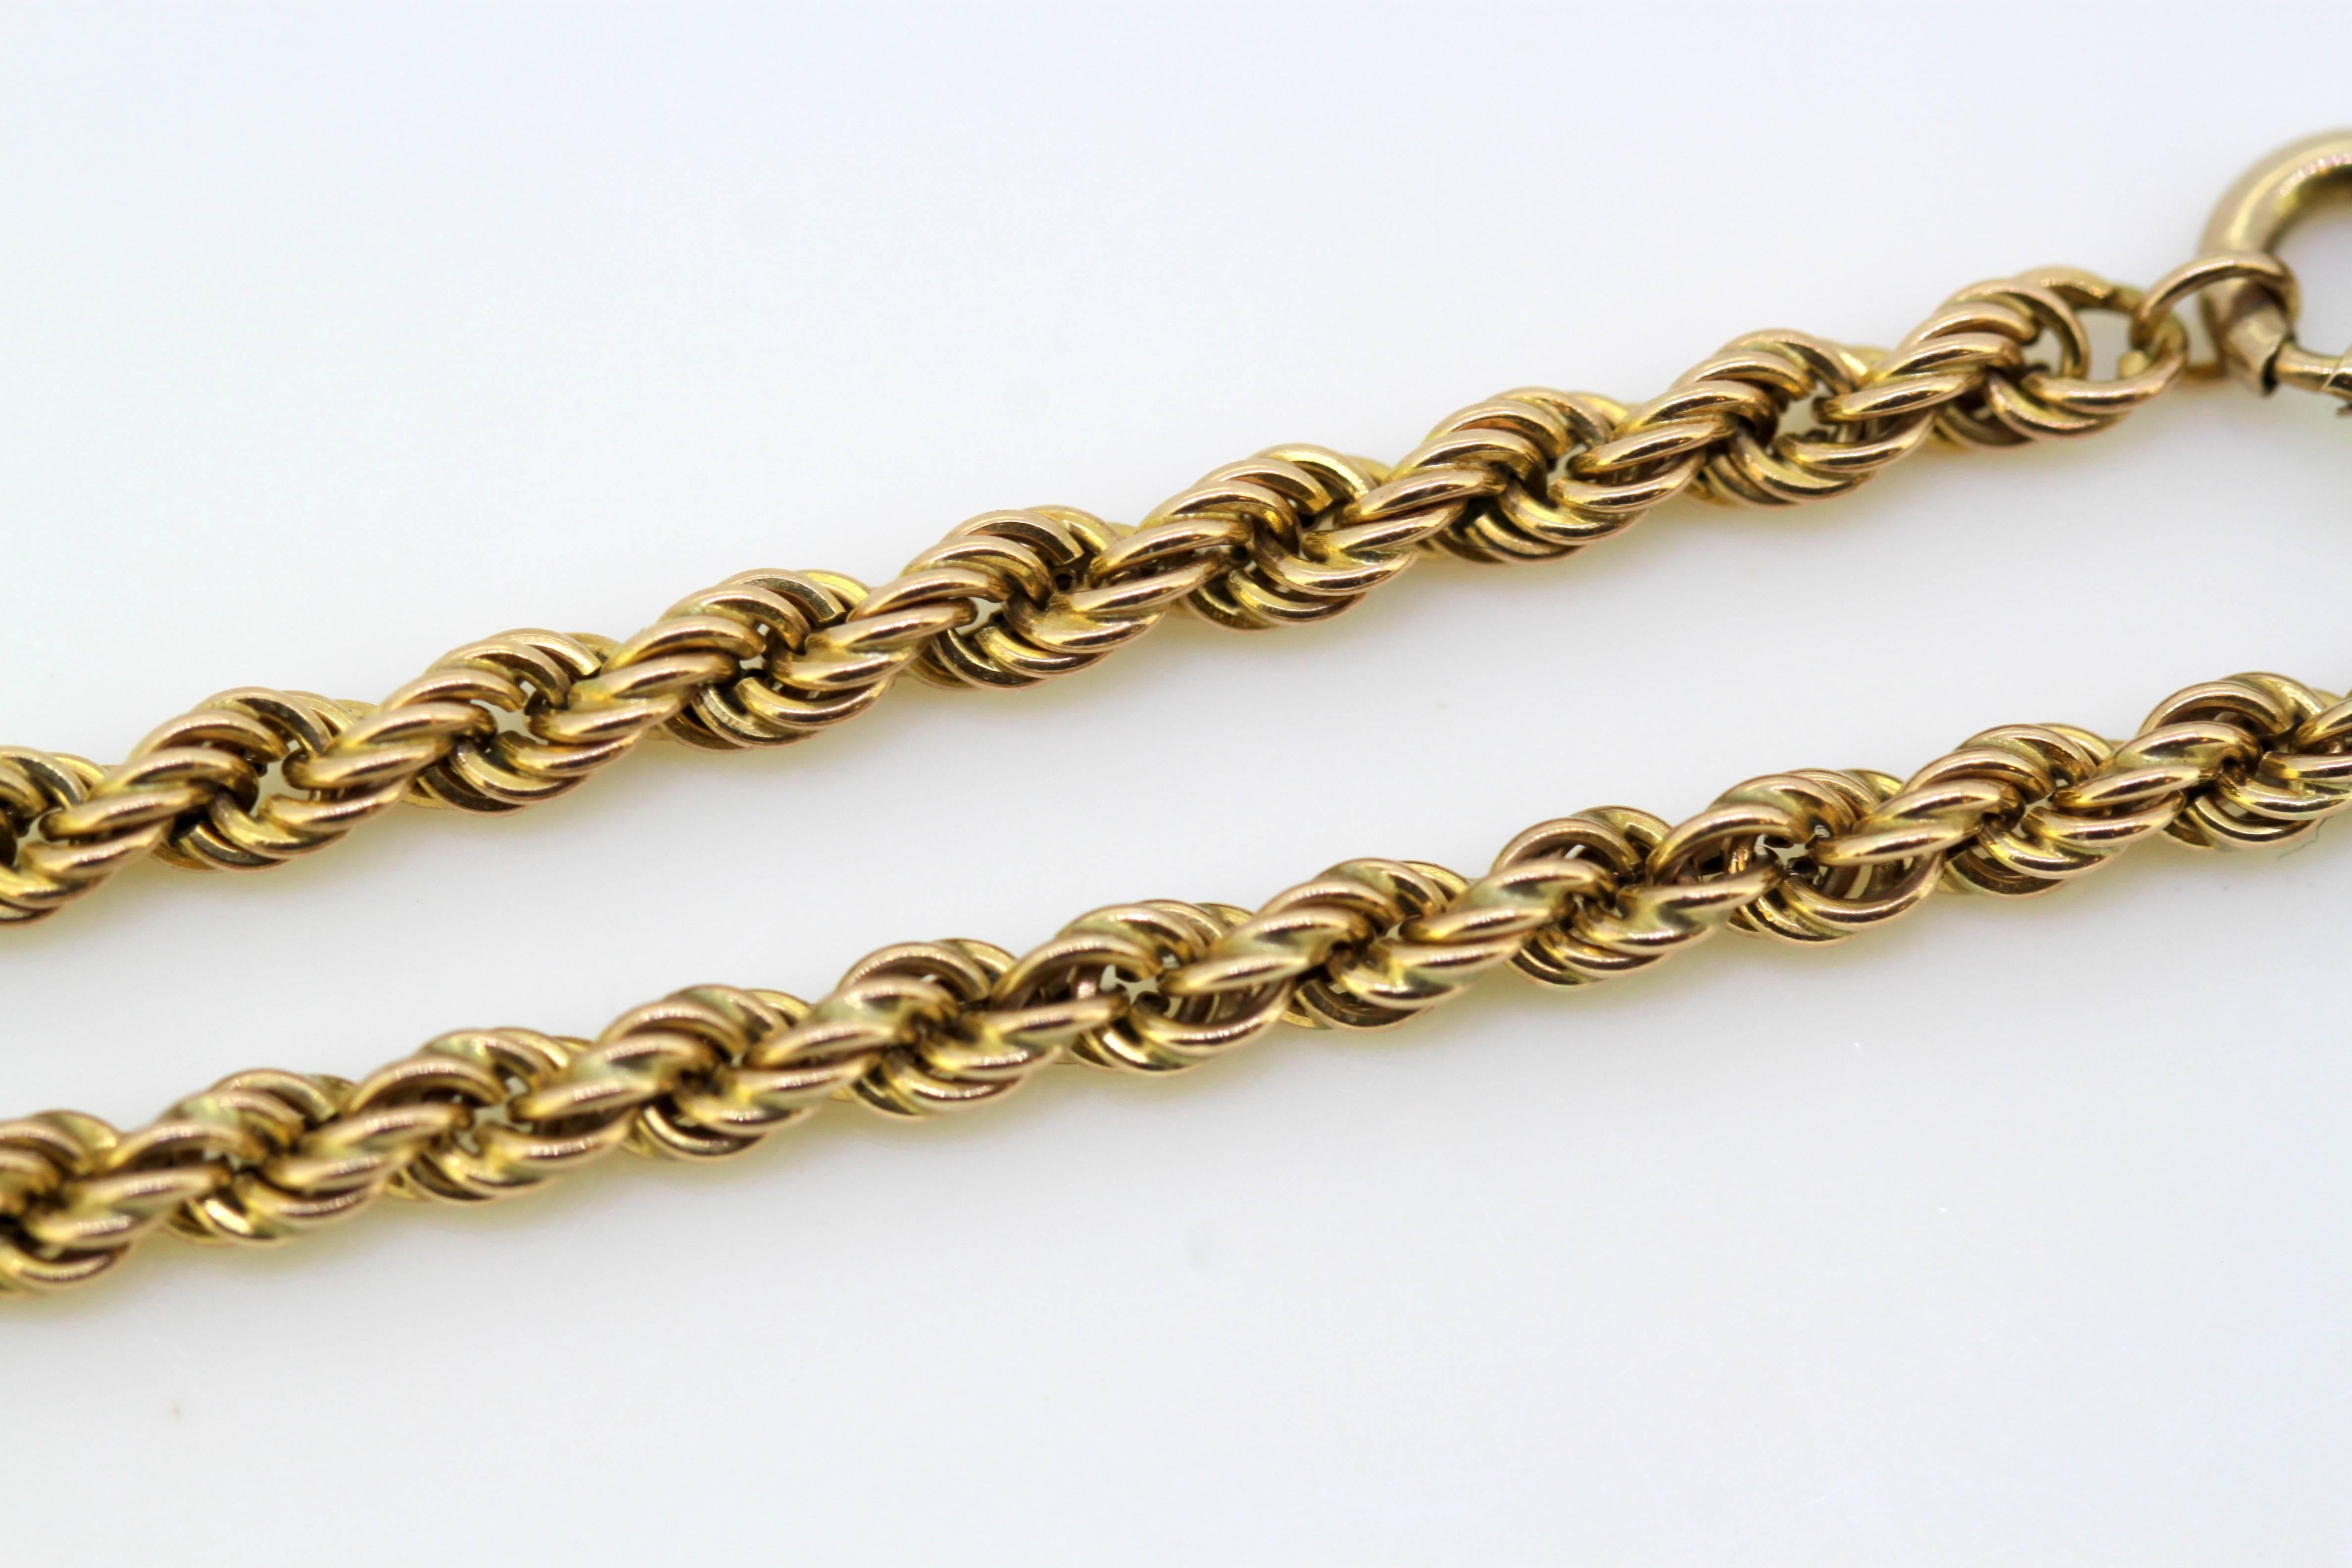 Vintage 9 Karat Yellow Gold Necklace by Addis & Co, London Import 1980 1